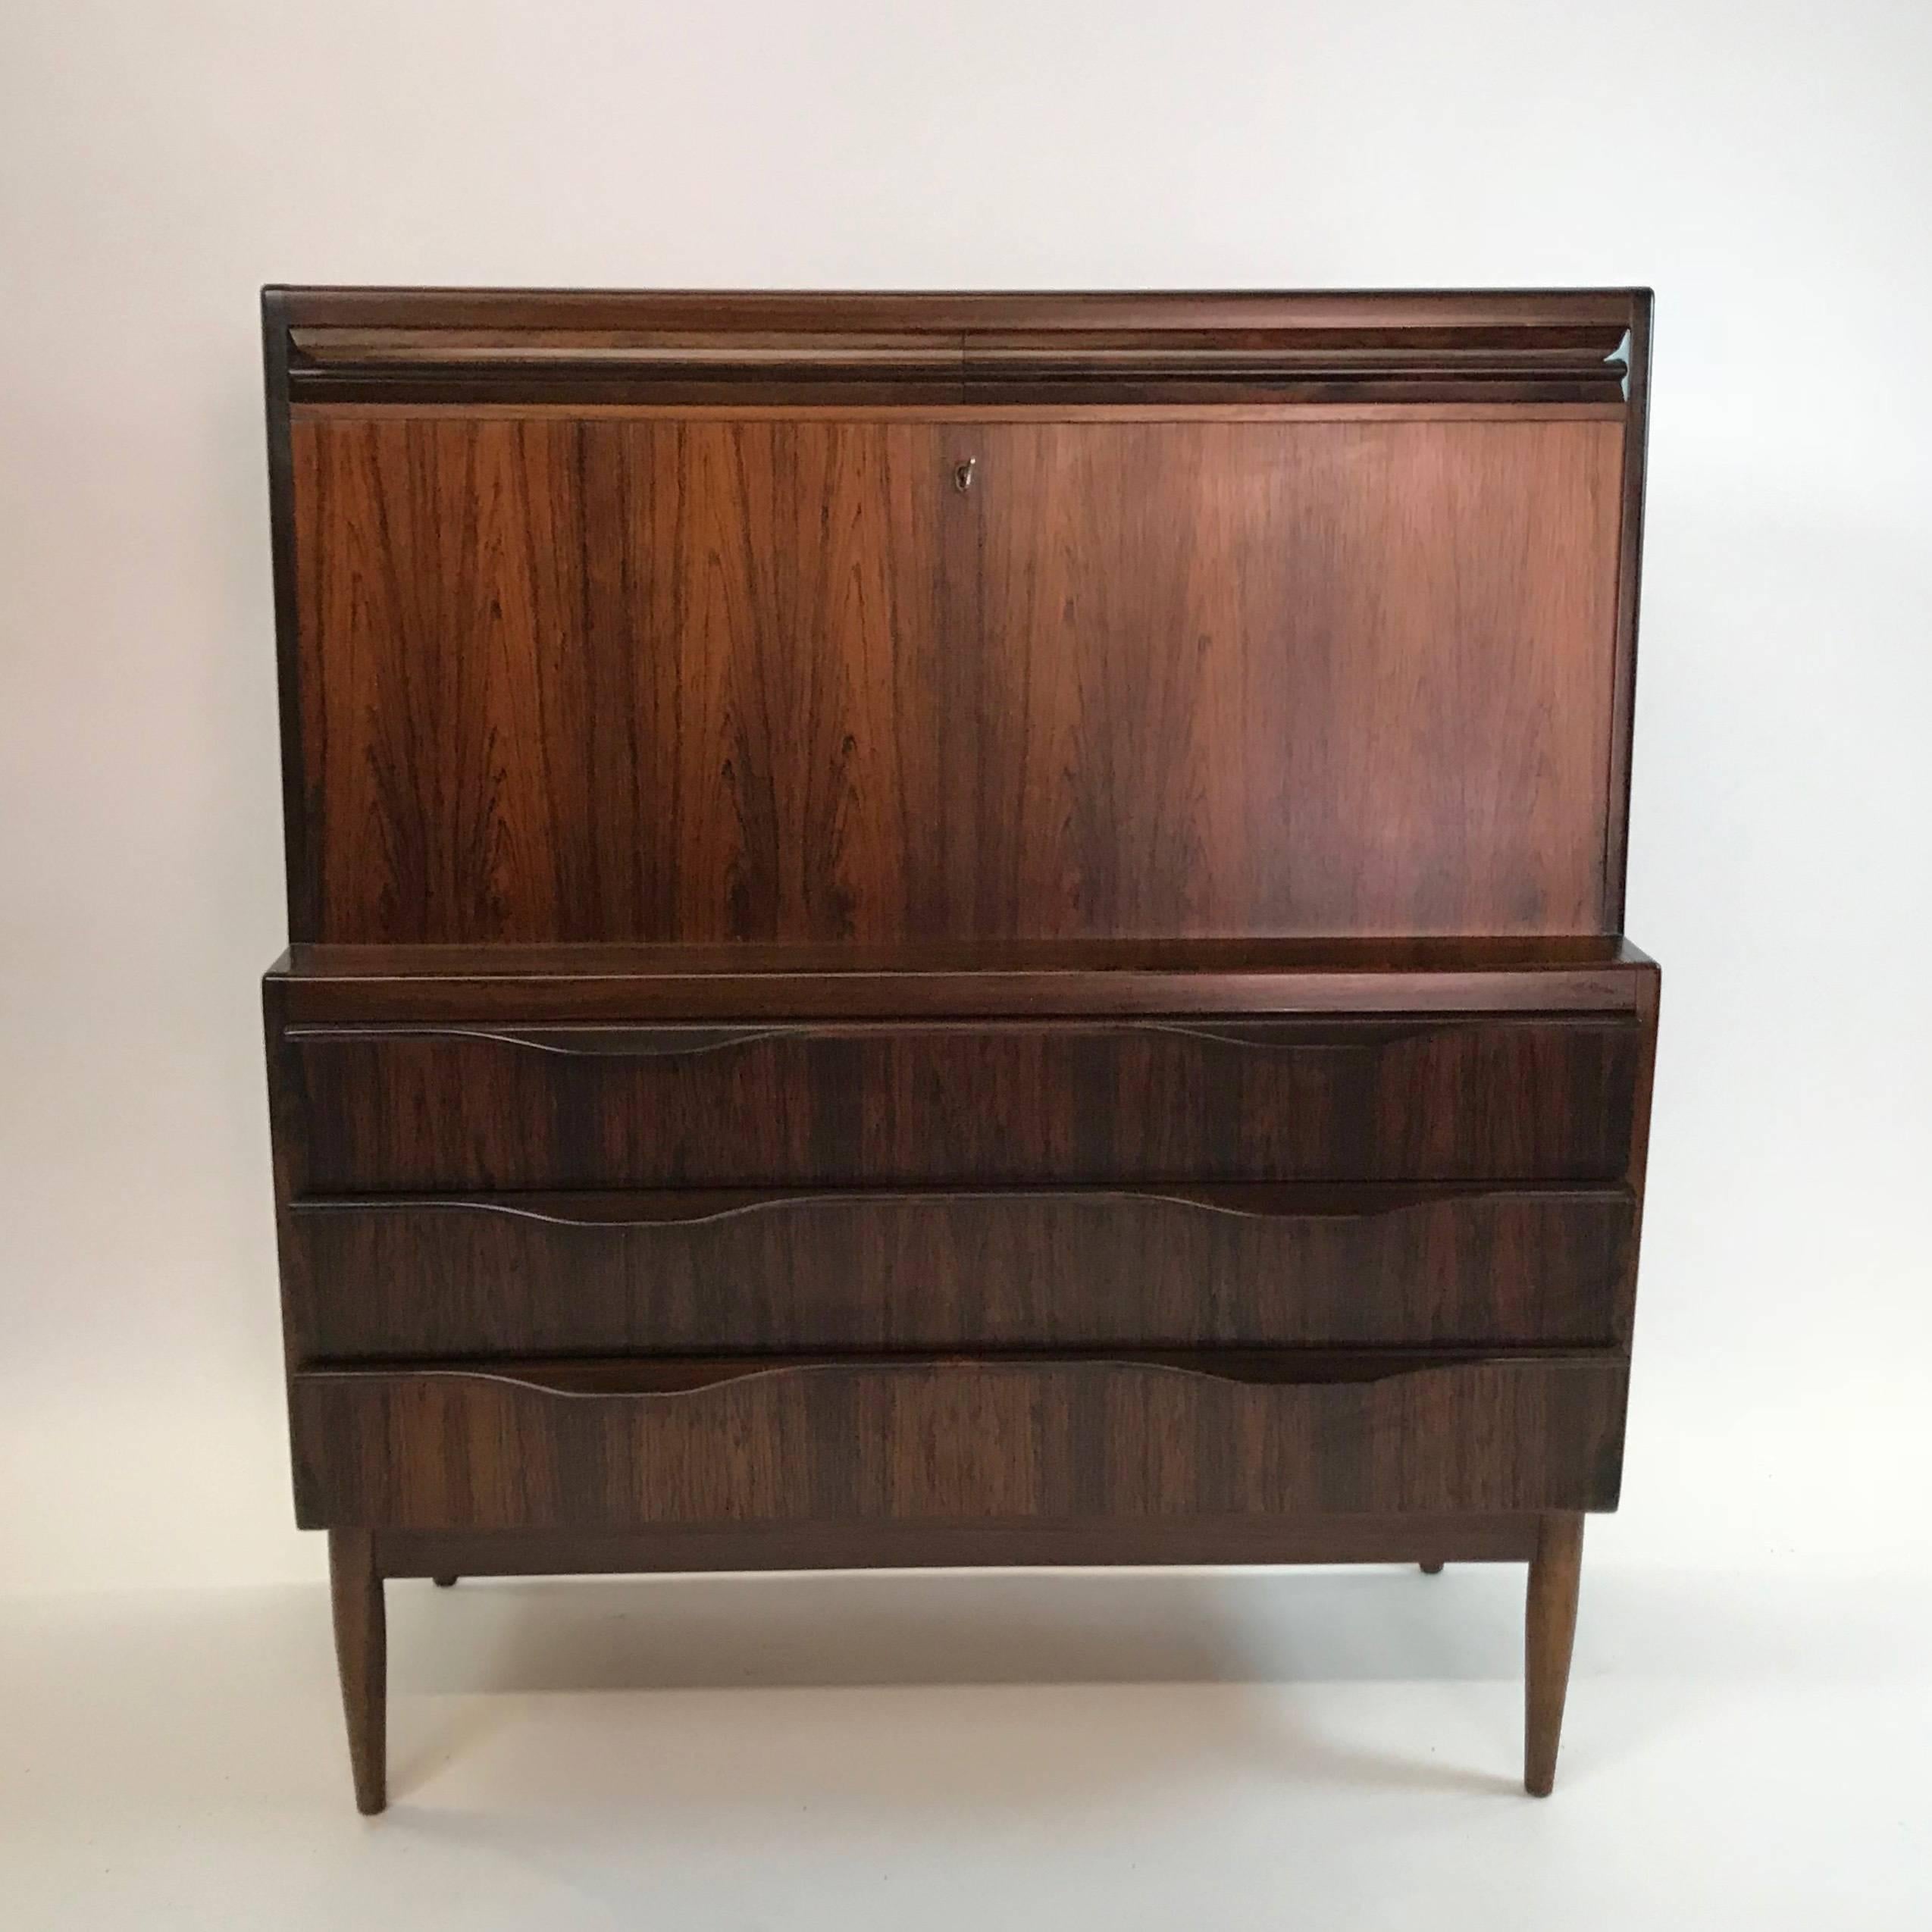 Scandinavian Modern, secretary cabinet by Ib Kofod-Larsen features a rare, exotically grained rosewood finish with beautifully sculpted drawer handles and tapered legs. The top front opens into a desk space revealing a variety of drawers, shelves